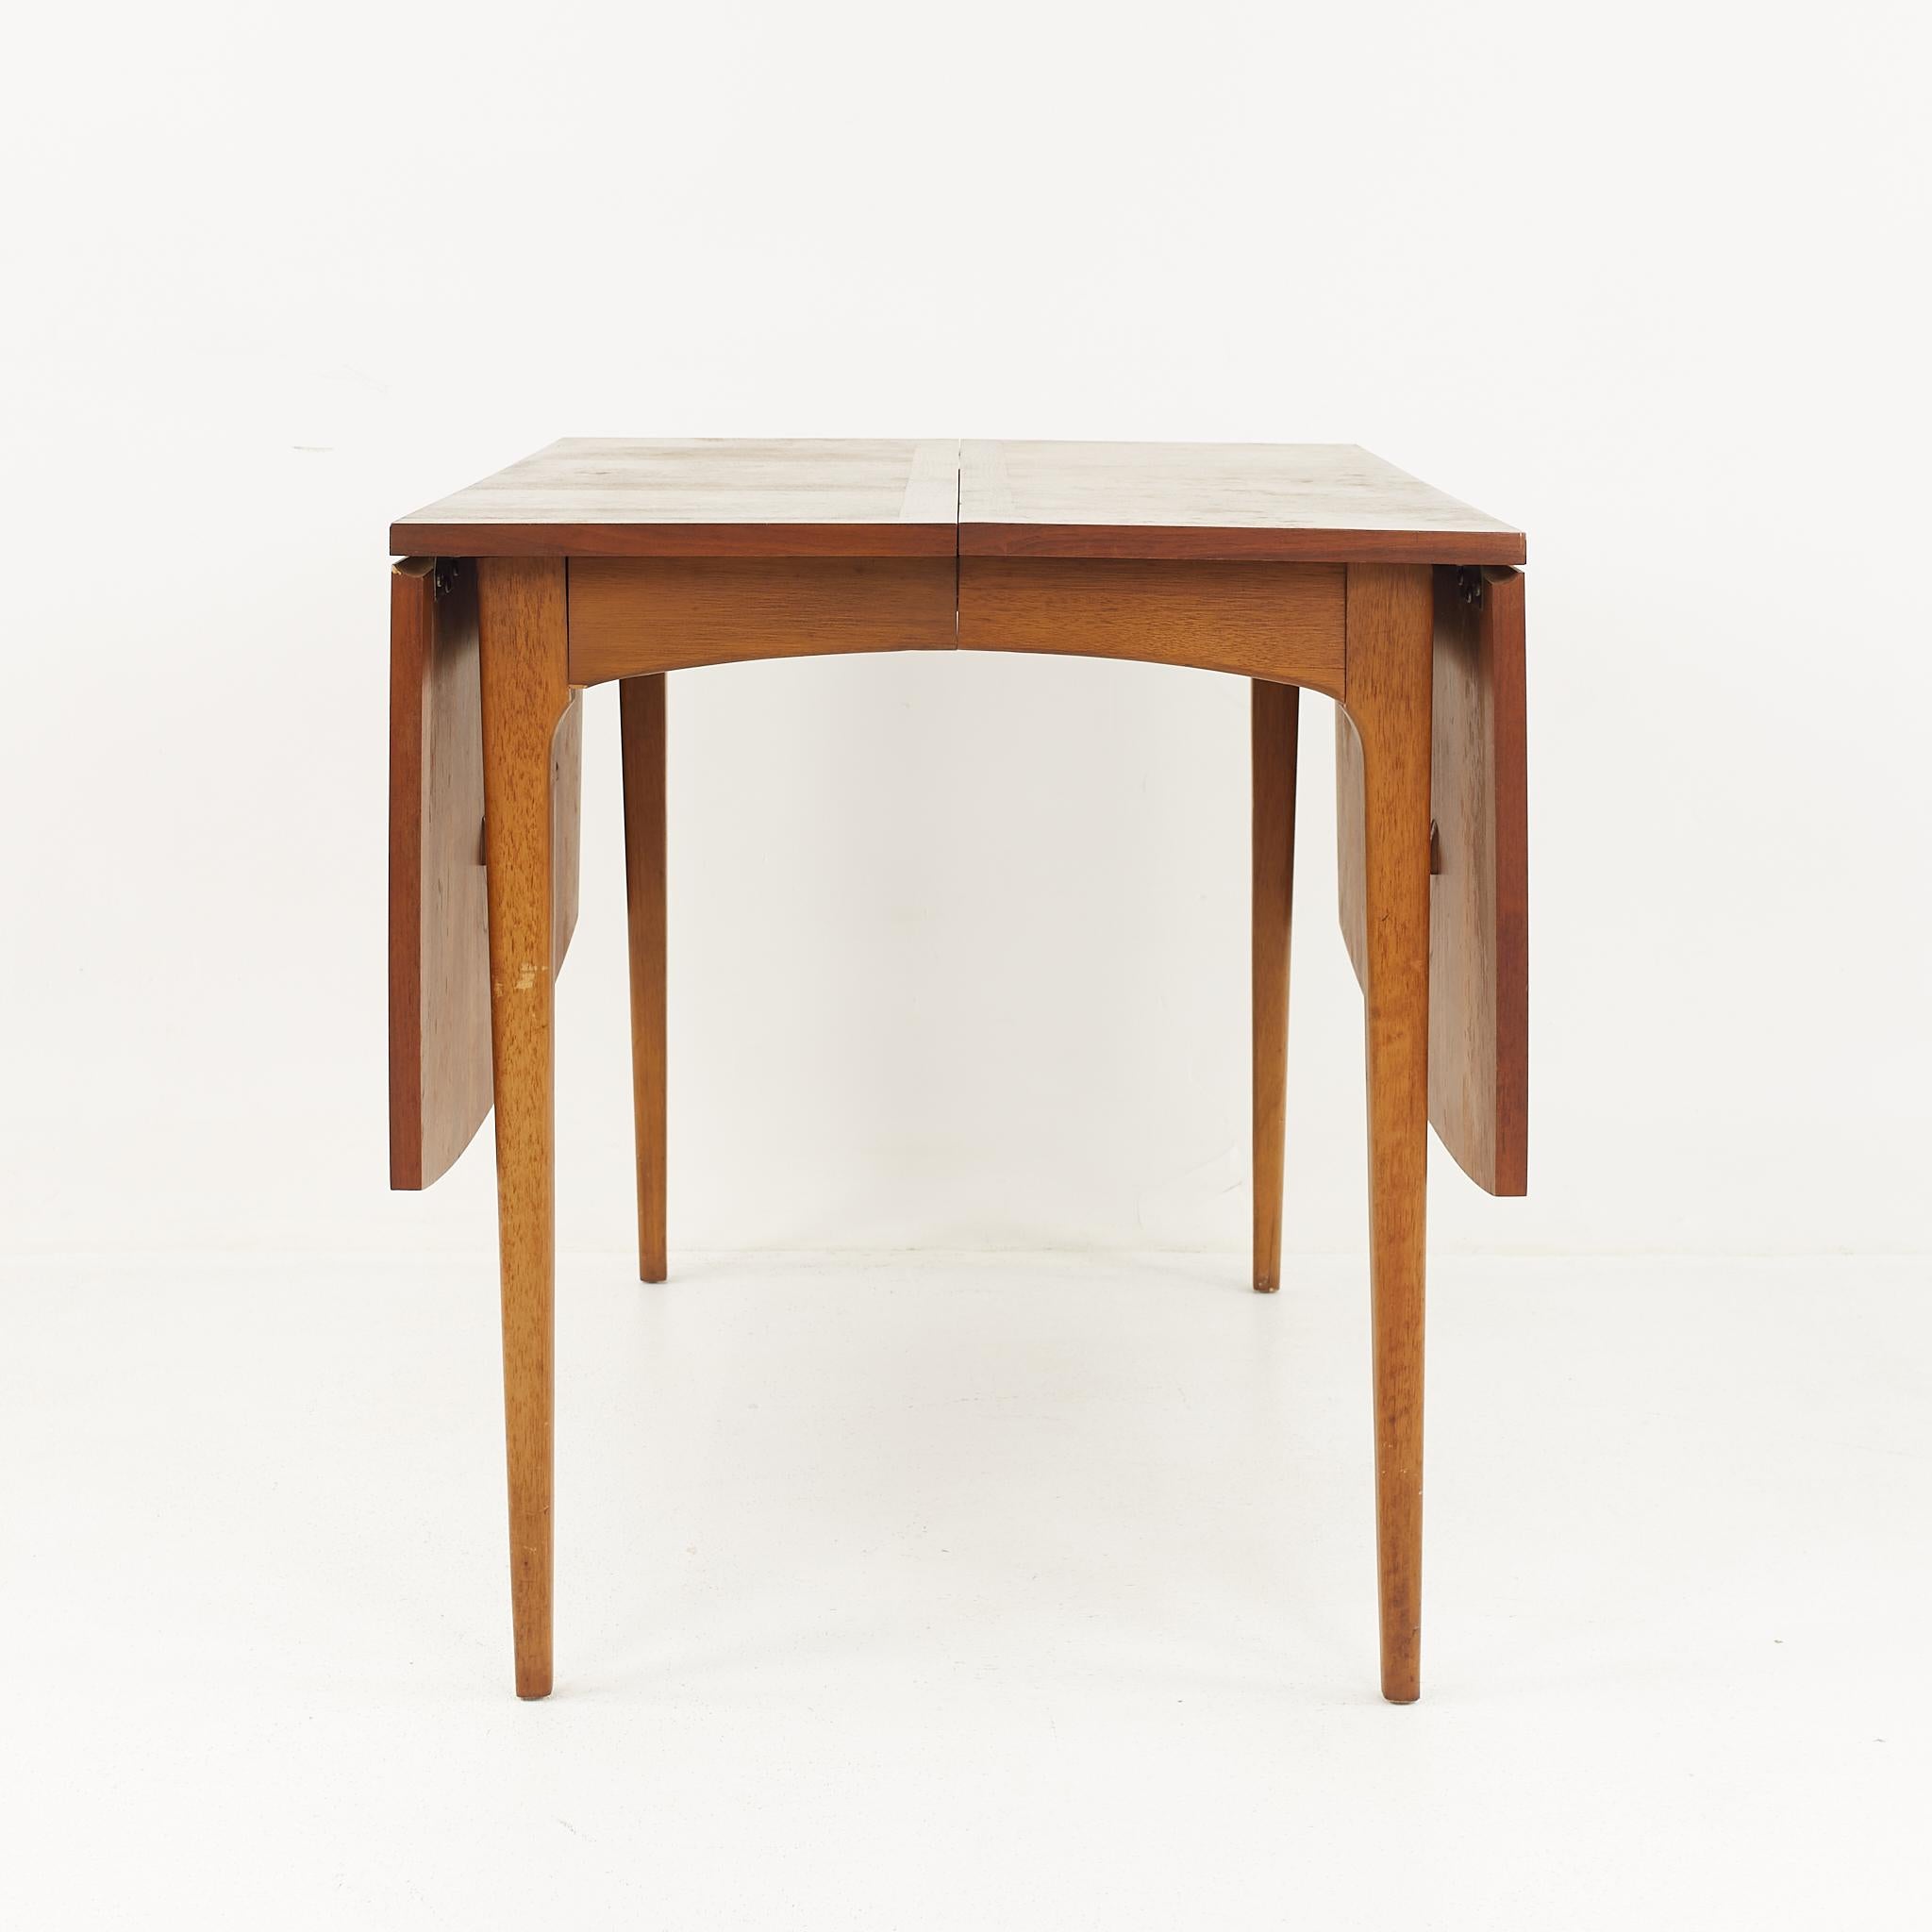 Lane Rhythm mid-century walnut drop leaf expanding dining table with 2 leaves

The table measures: 62 wide x 42 deep x 29.25 high, with a chair clearance of 25.75 inches; each leaf is 18 inches wide, making a maximum table width of 98 inches when